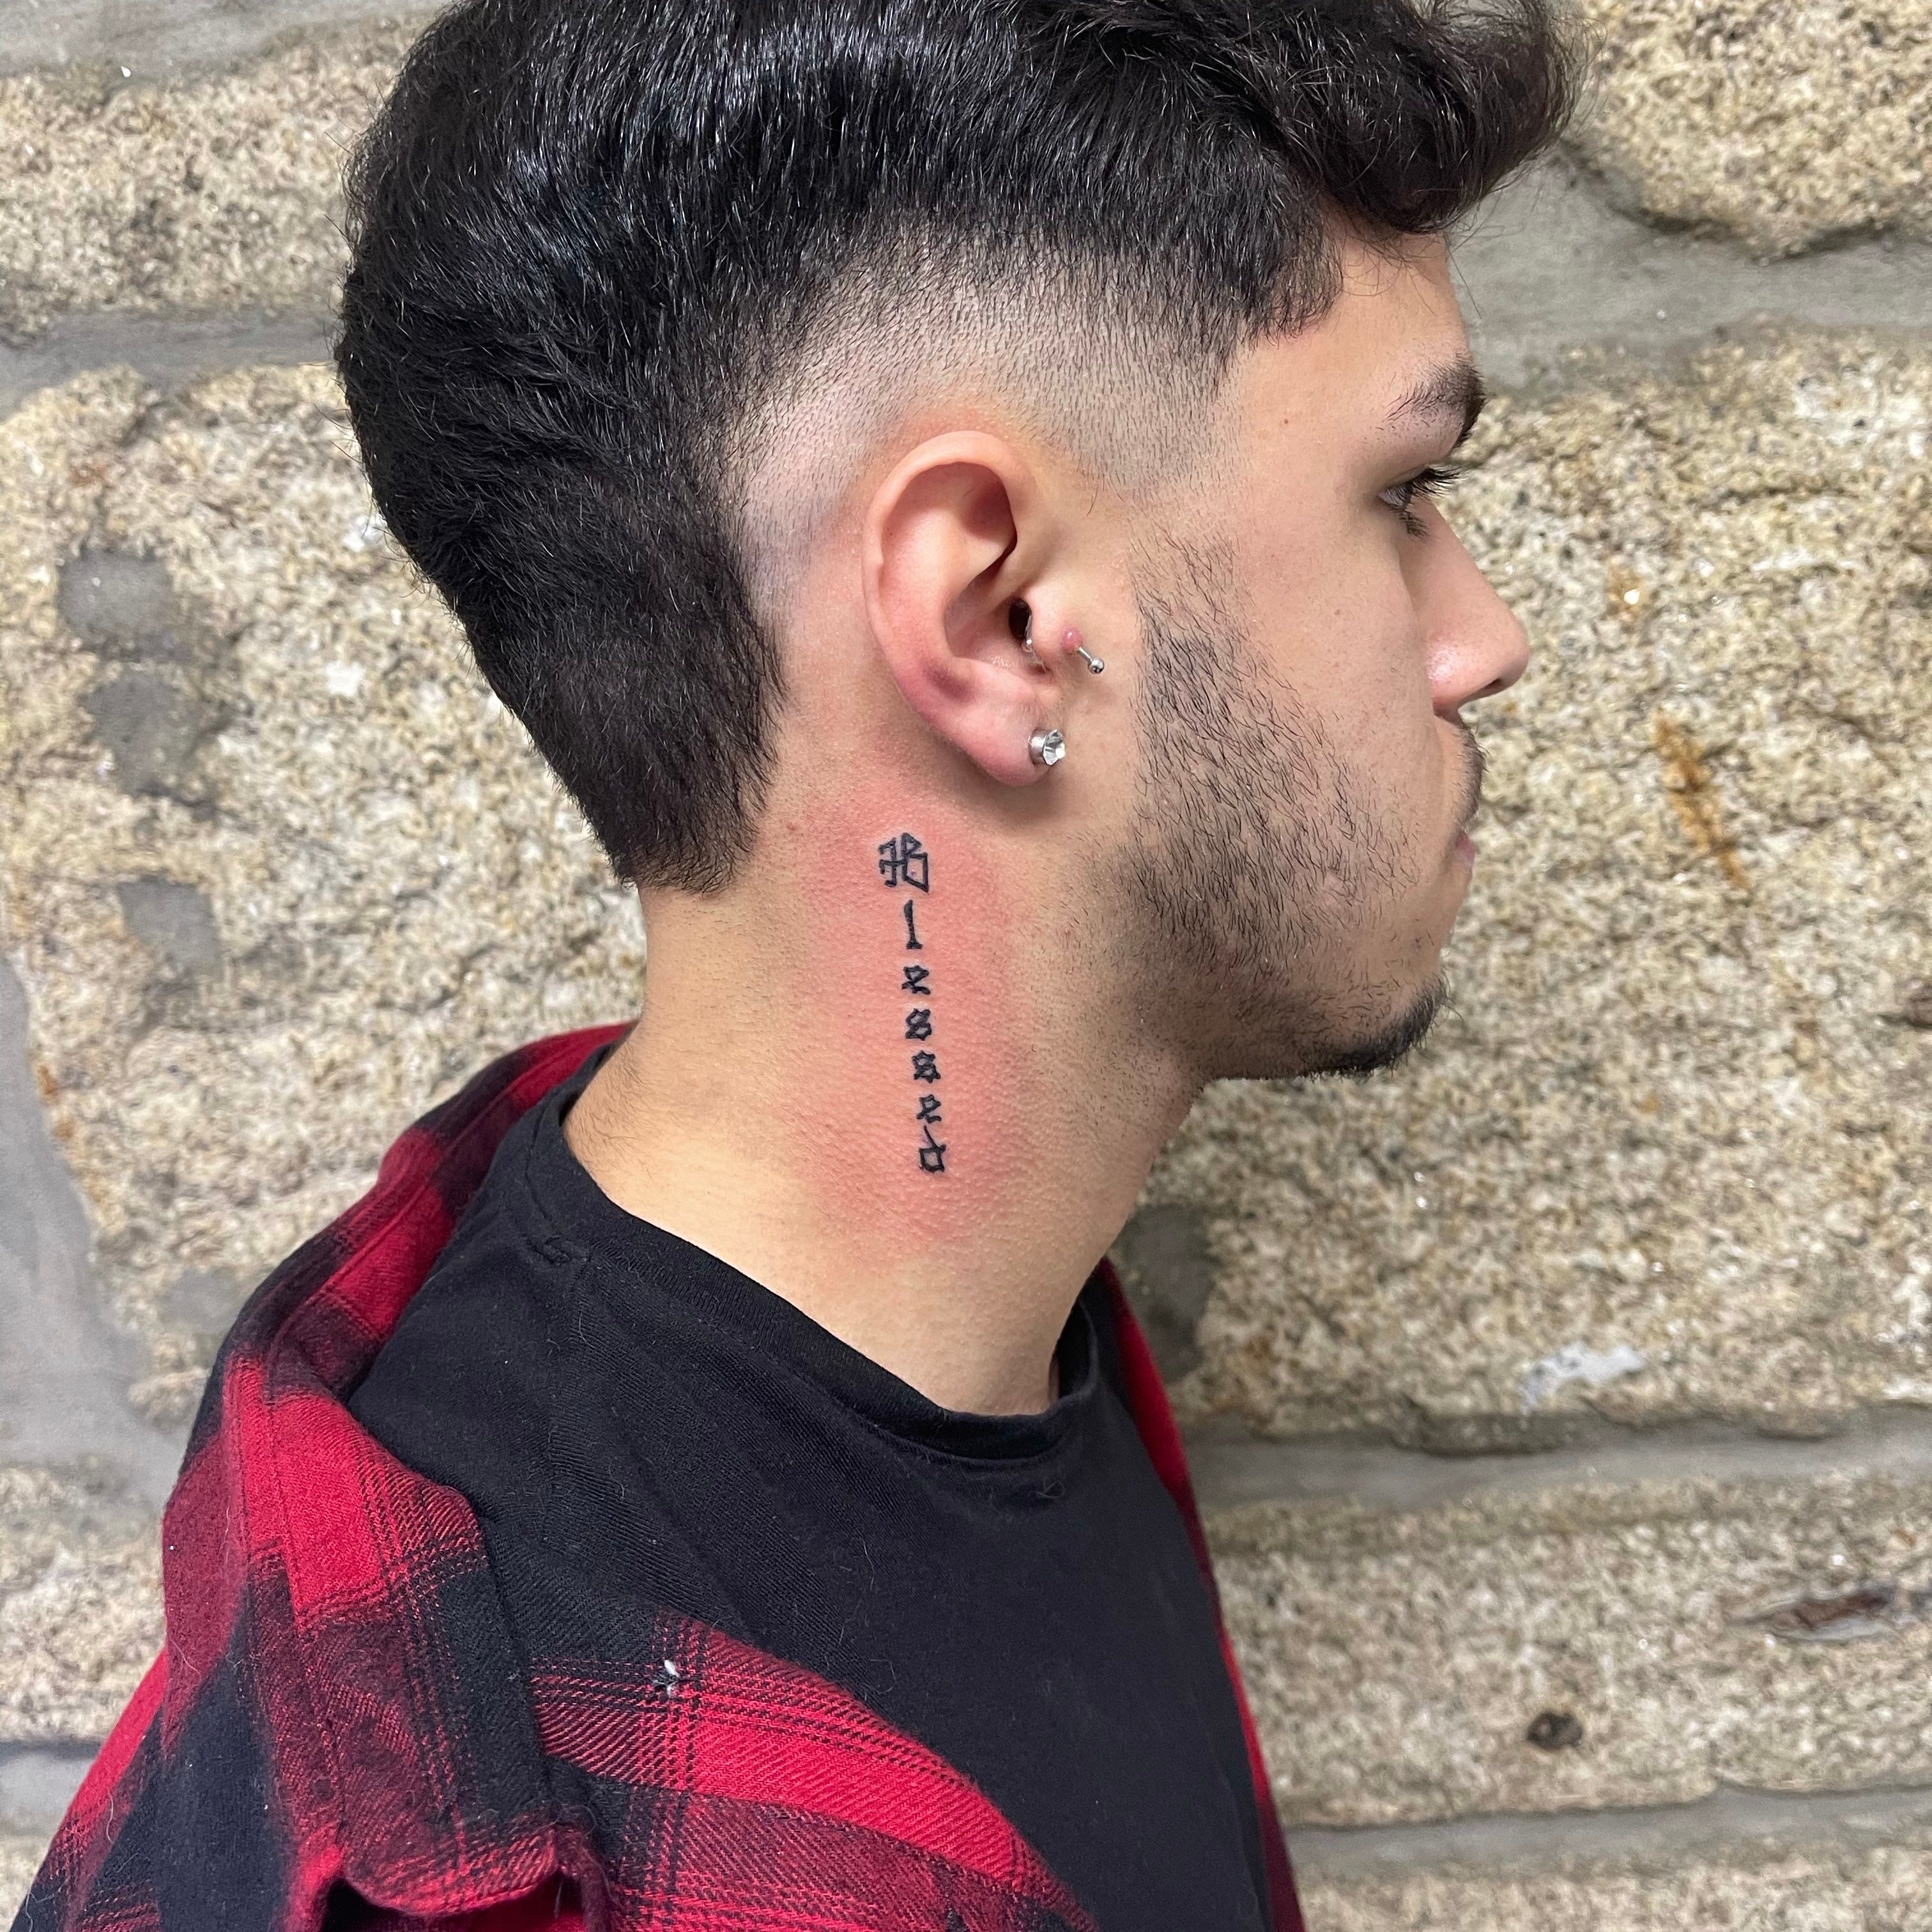 Temporary Neck Tattoos  Neck Tattoos for Men and Women  Tagged moon  neartattoos